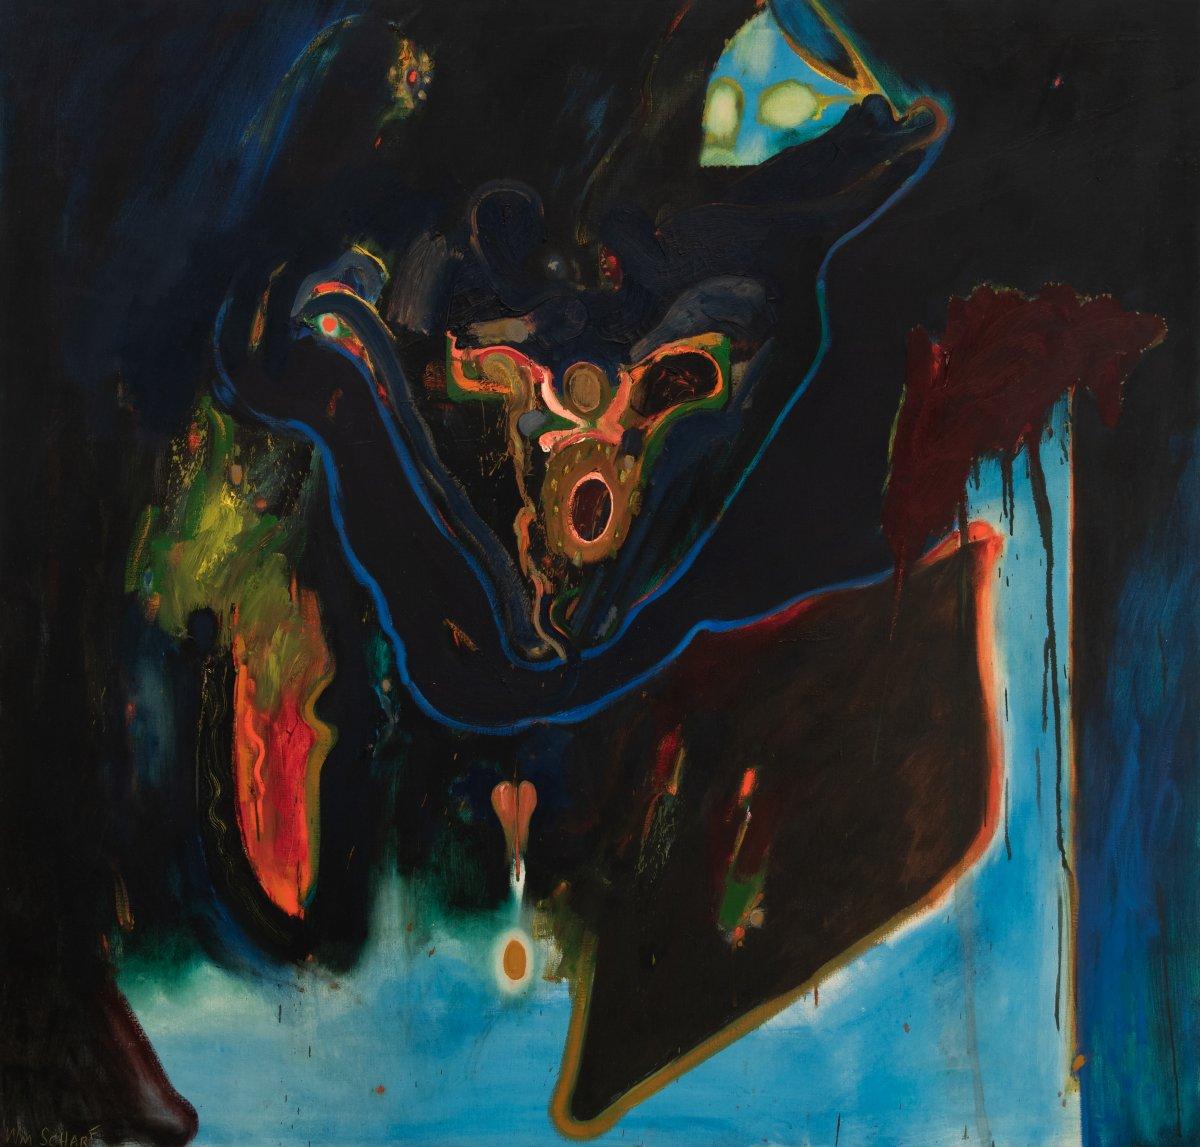 William Scharf
Untitled, 1962
Signed lower left; signed and dated verso
Oil on canvas
48 x 50 inches

A visionary painter with ties to the avant-garde artistic community in New York at midcentury, William Scharf nevertheless defies art historical